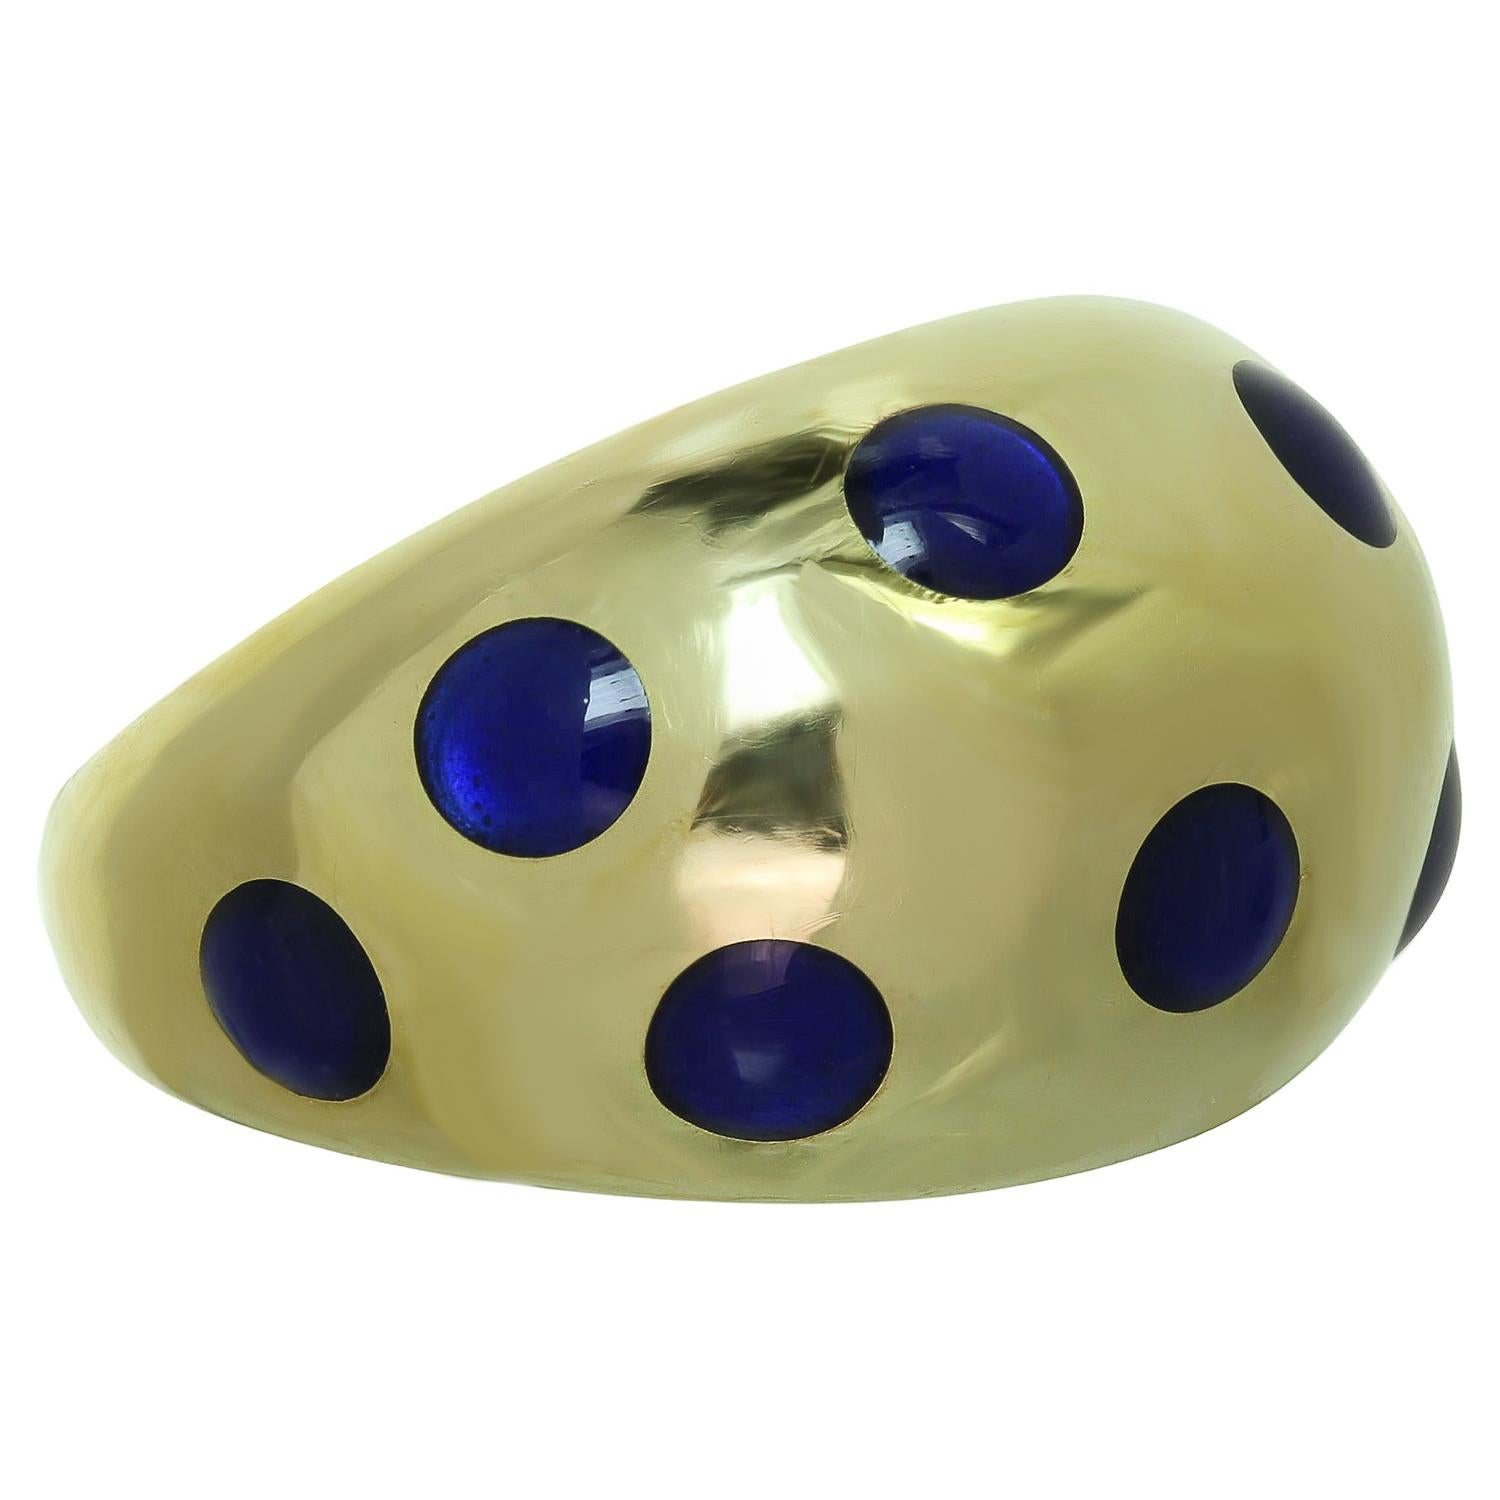 This fabulous Van Cleef & Arpels vintage ring features a domed band design crafted in 18 yellow gold and set with blue enamel dots. Made in France circa 1970s. Measurements: 0.47